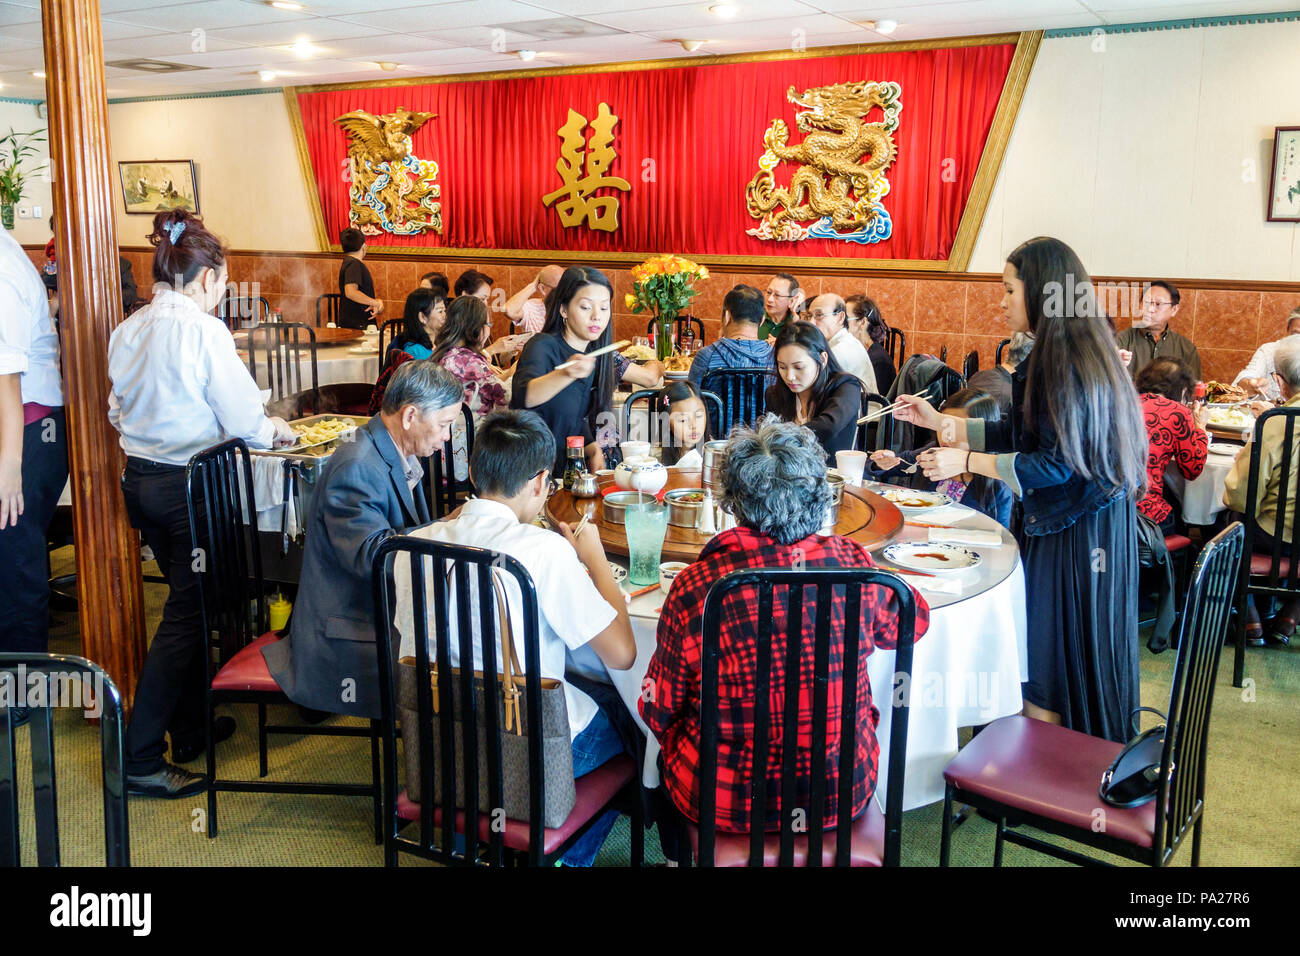 Orlando Florida,Chinatown,Lam's Garden Chinese,restaurant restaurants food dining cafe,dim sum,dining,large family,table,Asians man men,woman female w Stock Photo